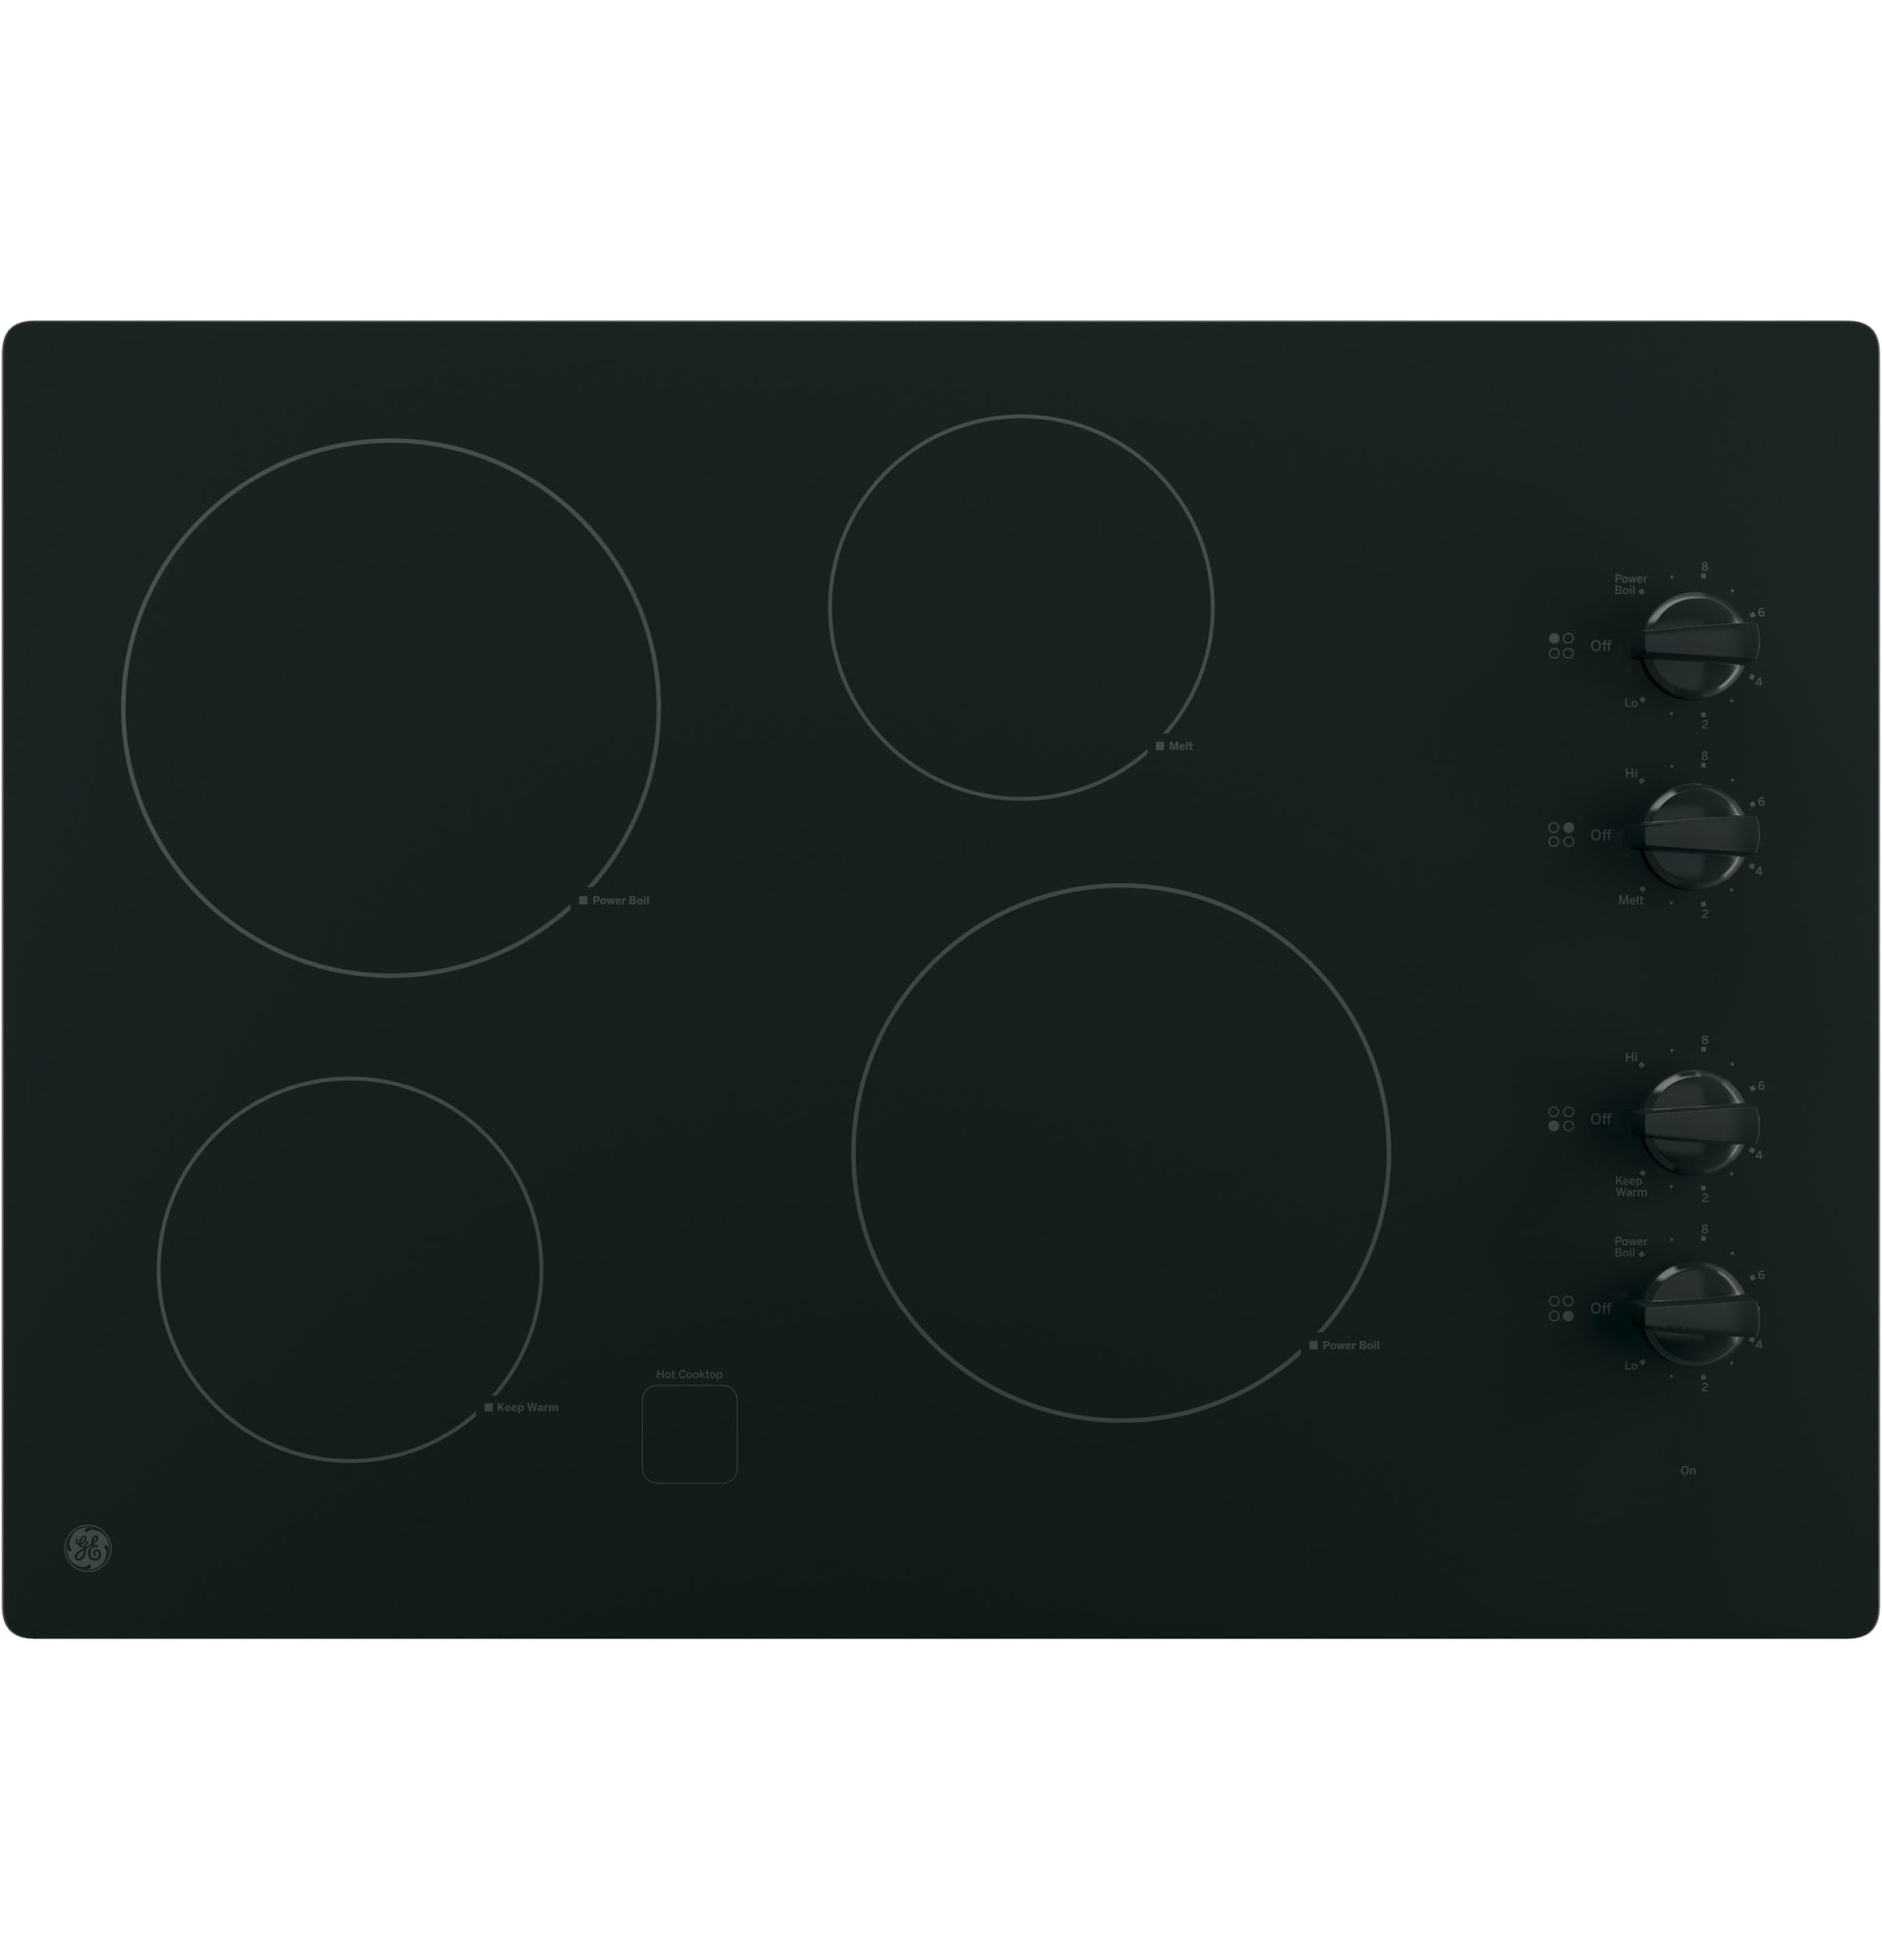 Whirlpool 30 Built-In Electric Cooktop White WCE55US0HW - Best Buy